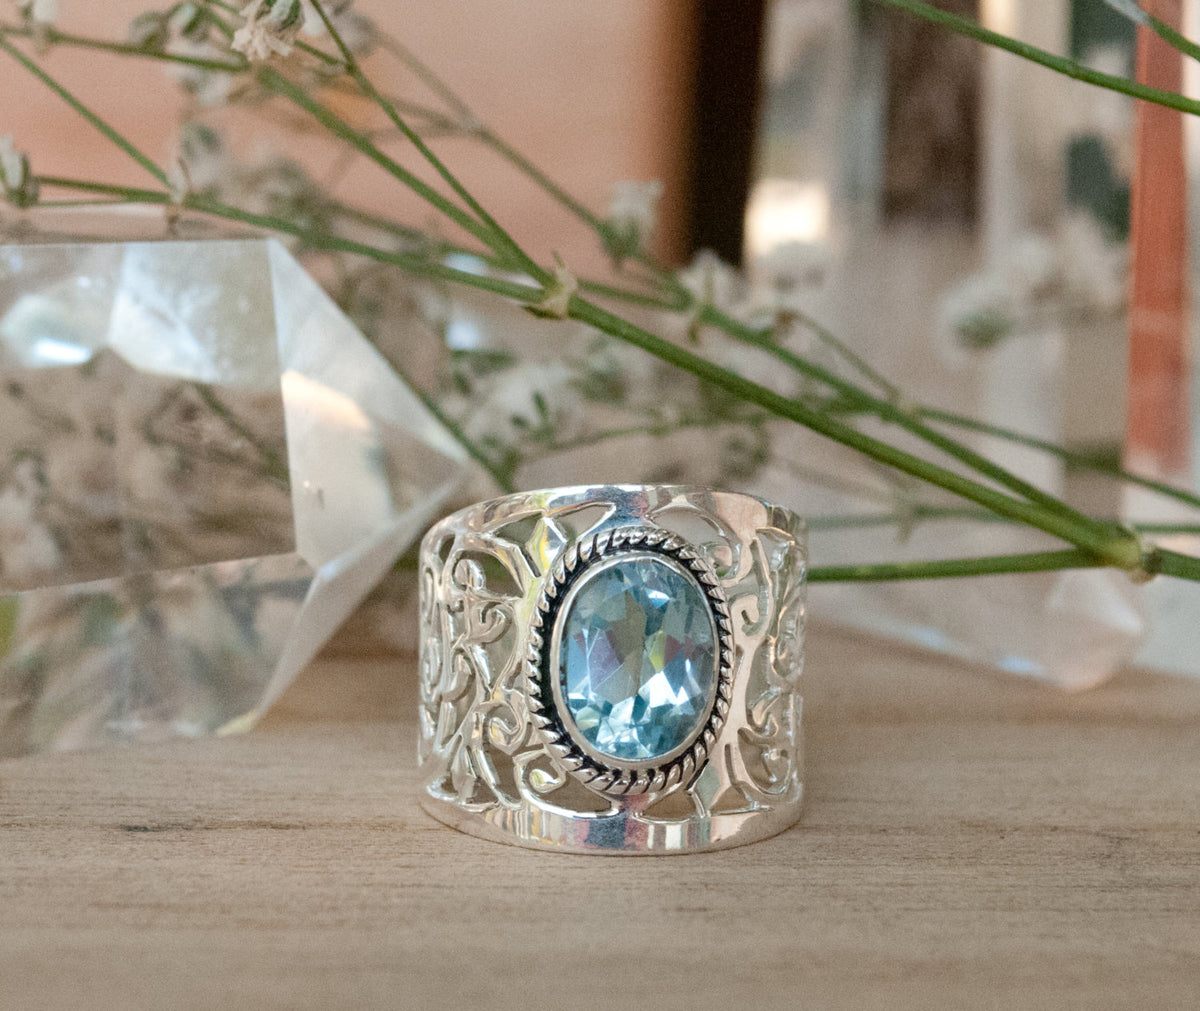 Blue Topaz Ring * Sterling Silver 925 * Filigree * Gemstone * Statement * Jewelry * Bycila * Gift For Her * Large Band BJR187